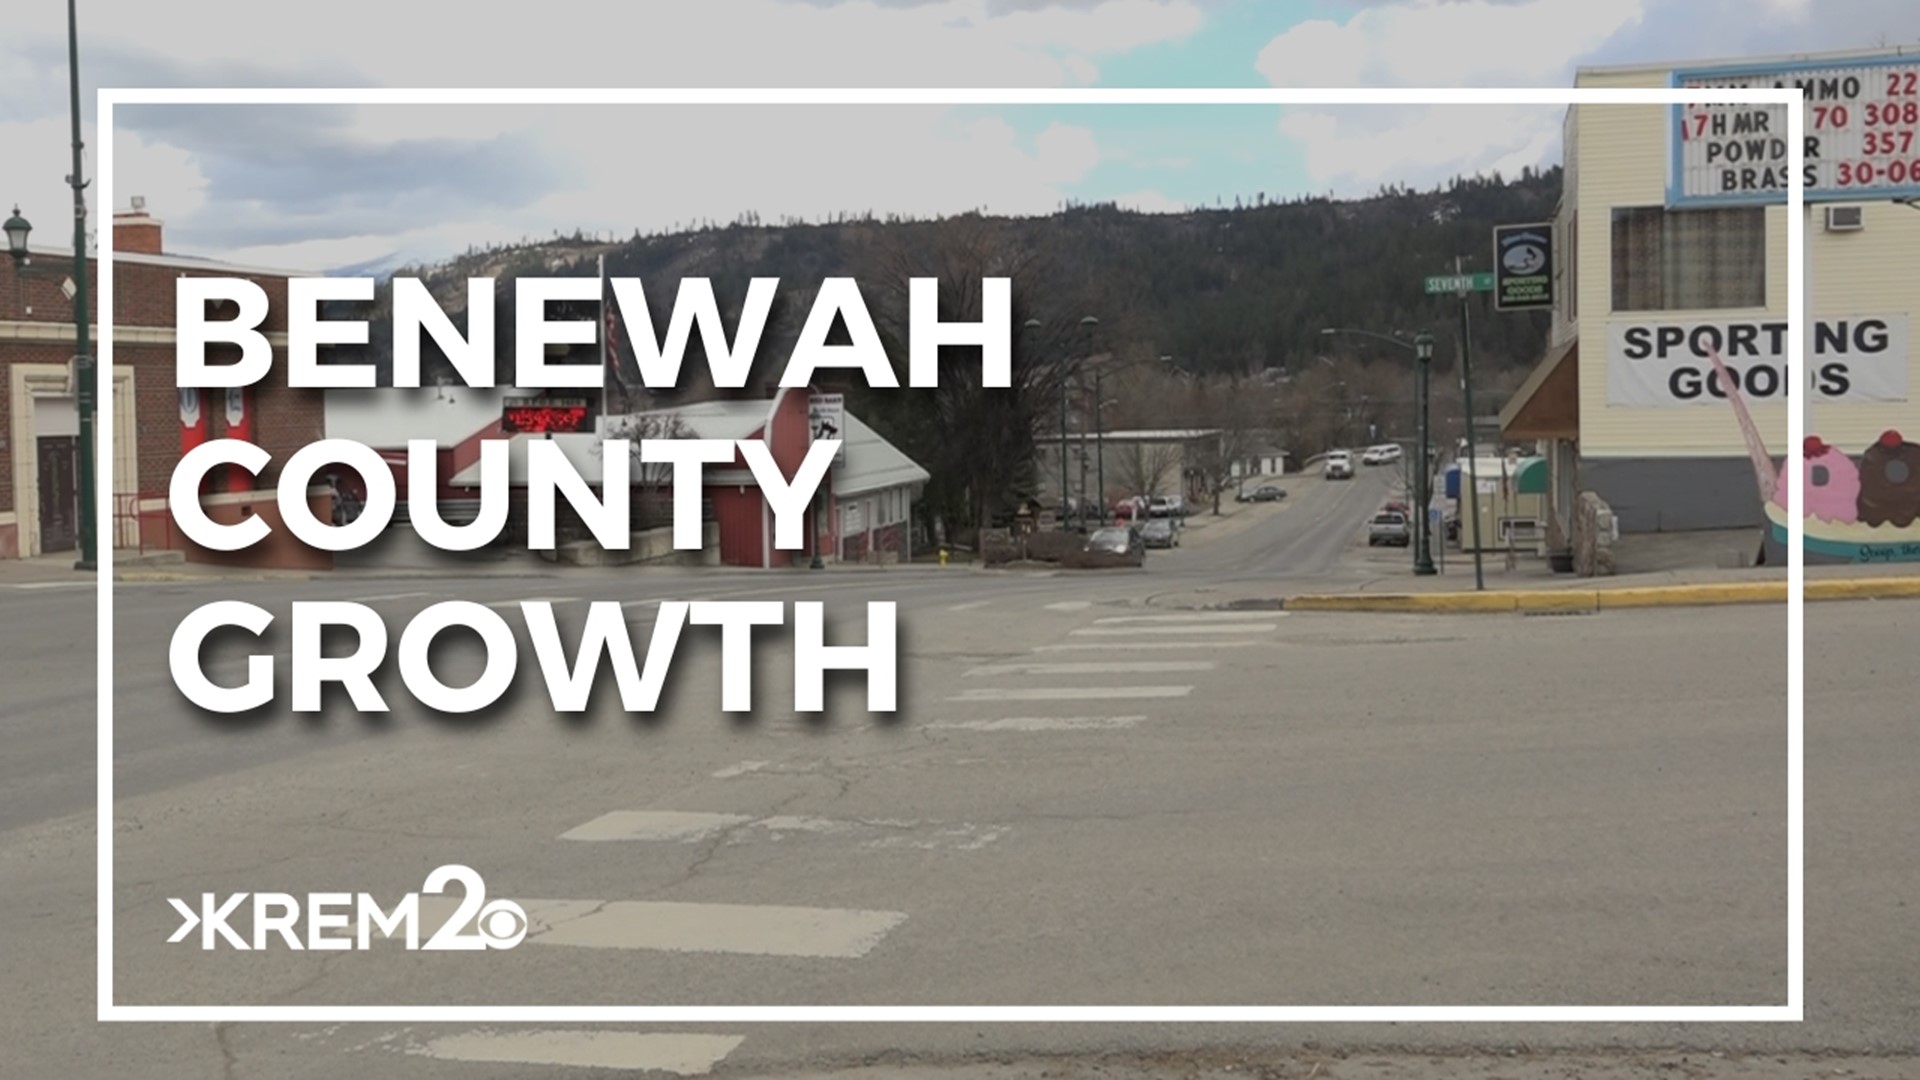 According to the Idaho Department of Labor, between 2021 and 2022, Benewah County say a 4.3% increase in its population.